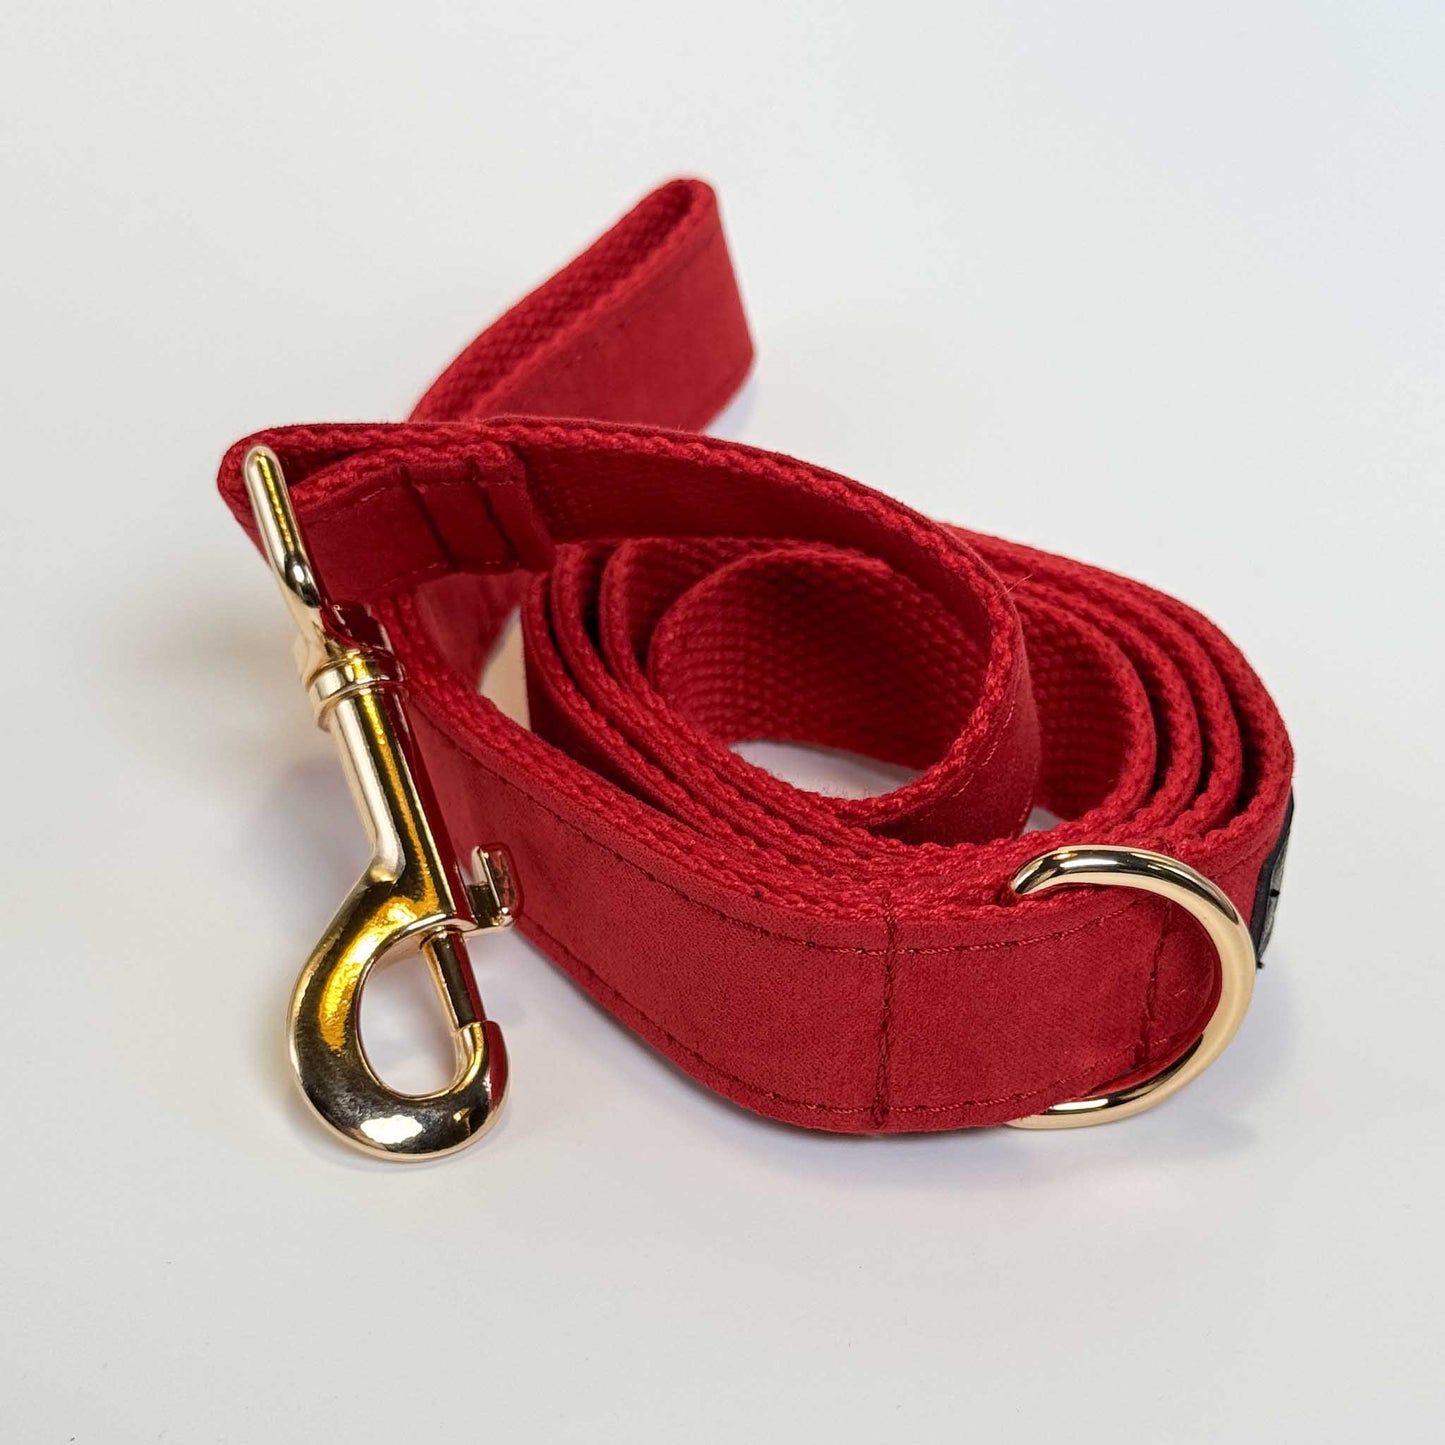 Fire Engine Red Leash - Sam and Dot